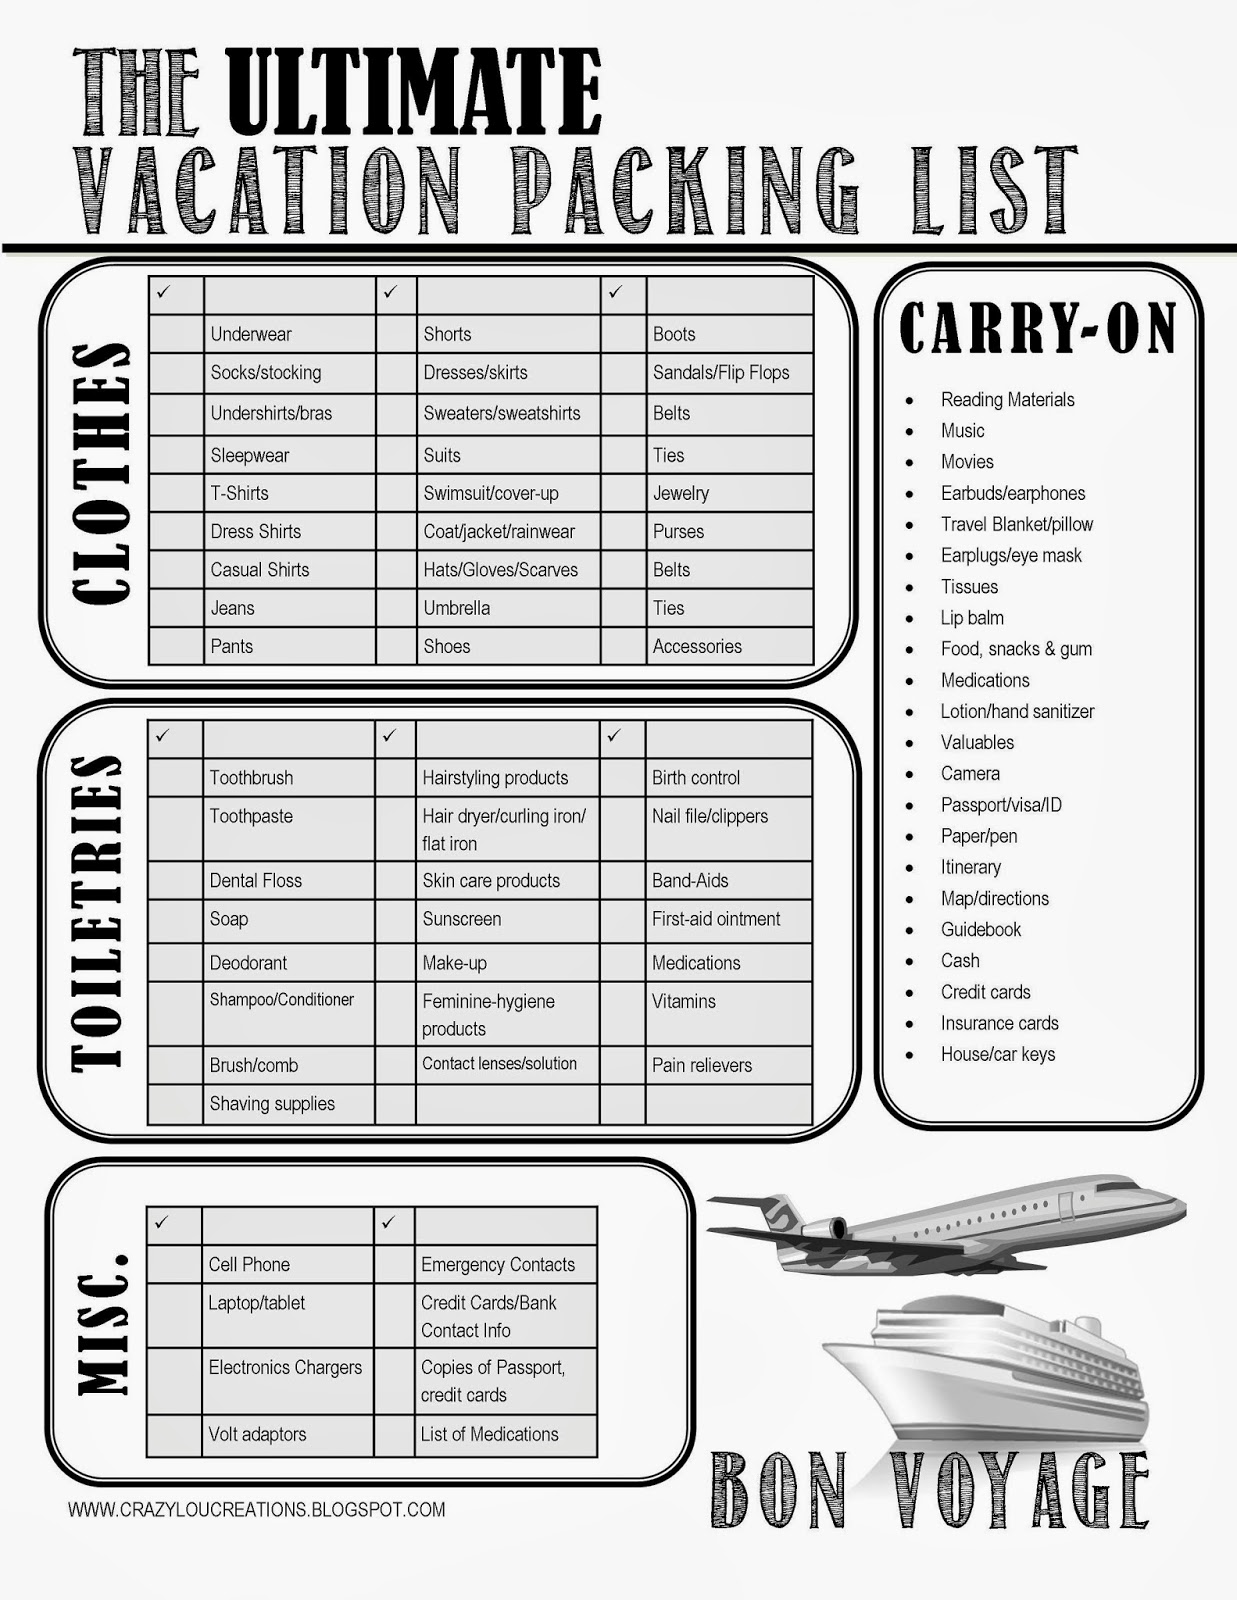 crazylou: THE Ultimate Vacation Packing List